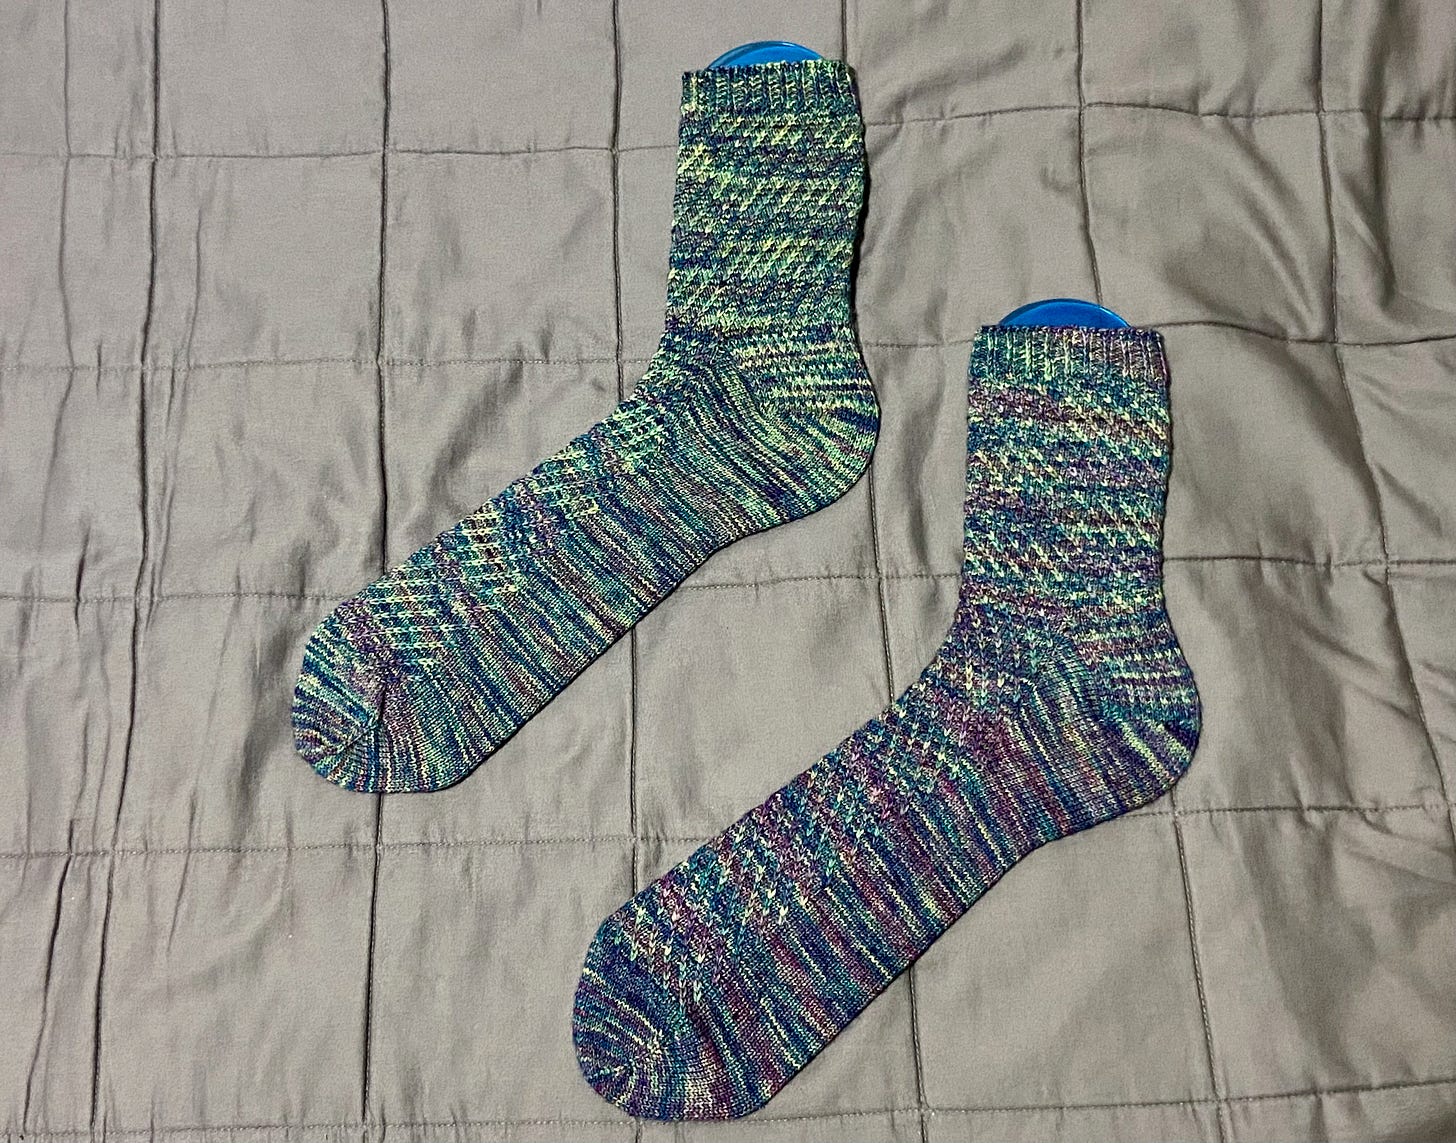 A completed pair of Dear Björn socks in variegated green/blue/purple yarn. They're placed on top of sock blockers.